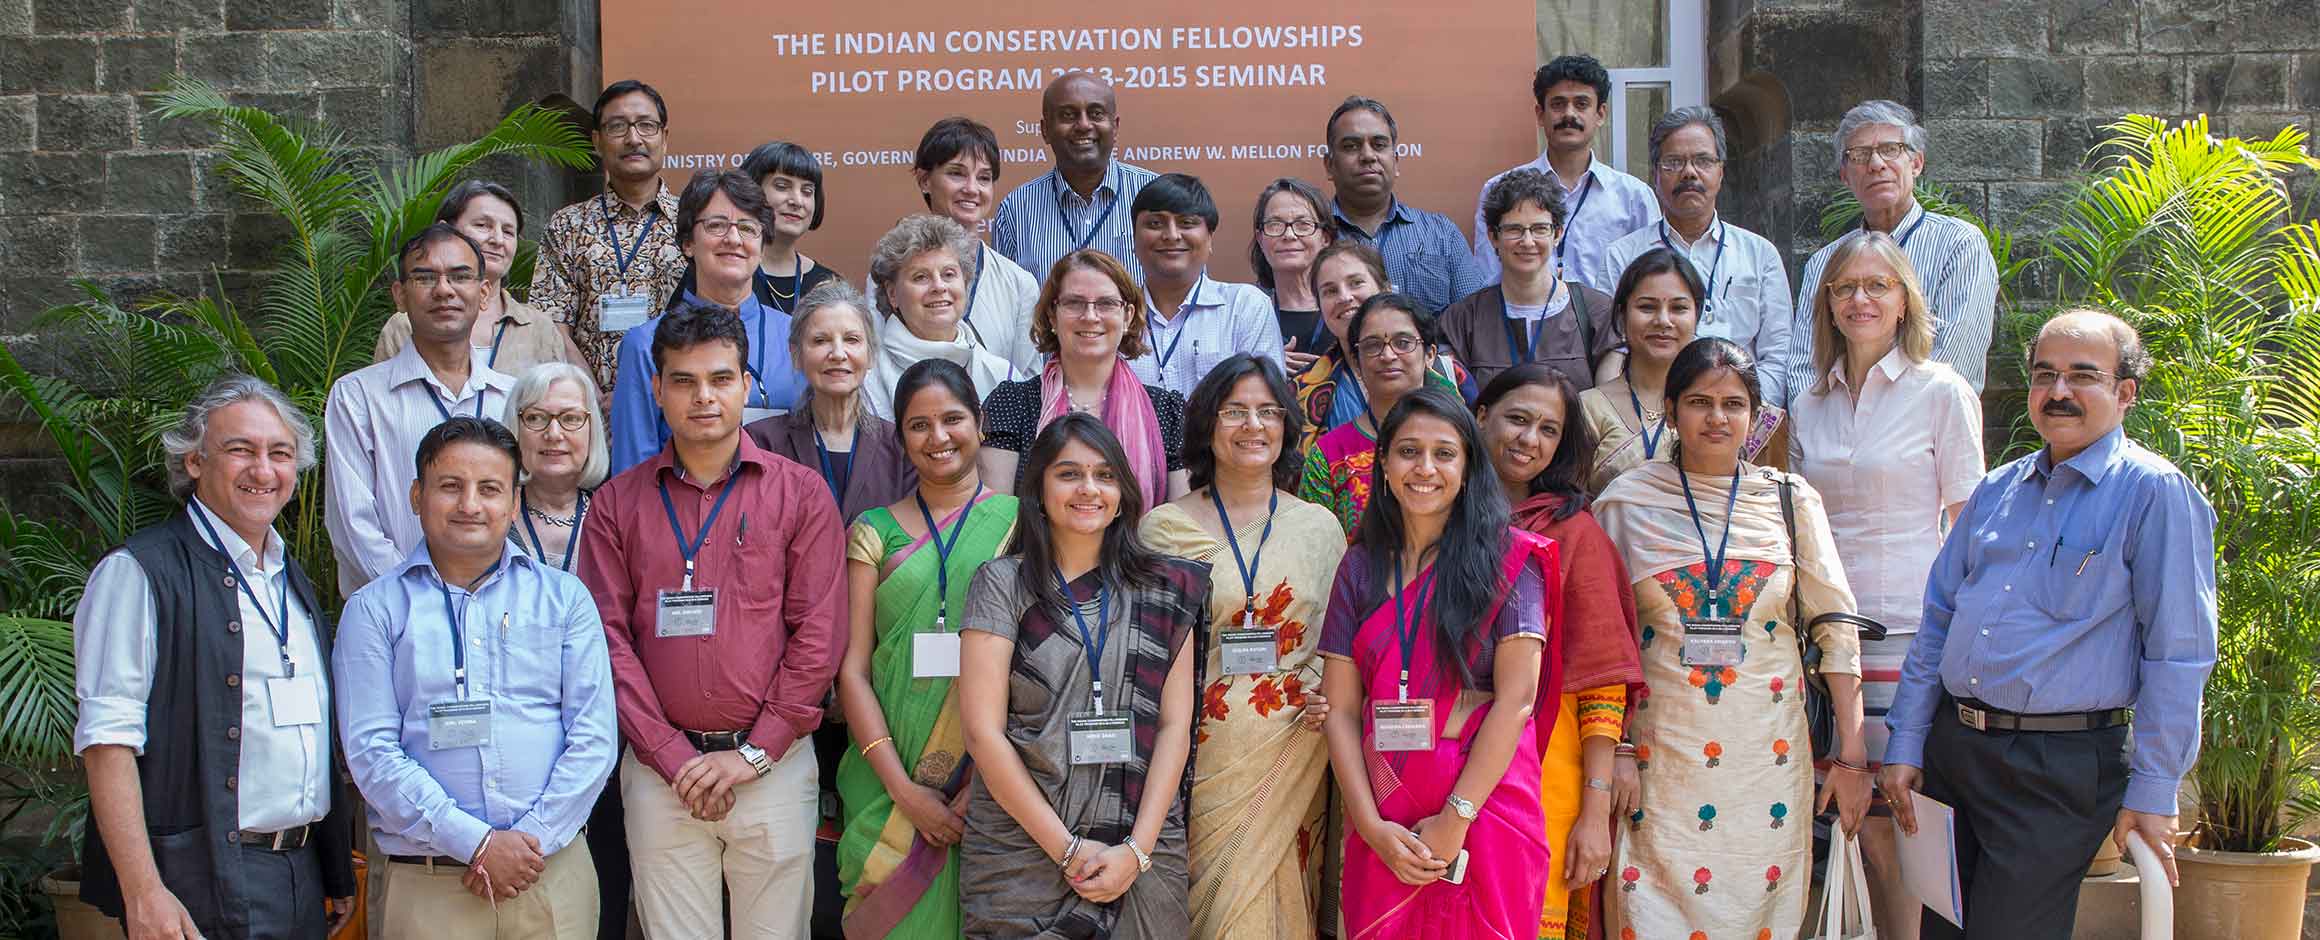 Group photo of participants of the Indian Conservation Fellowships Pilot Program 2013–2015 Seminar 